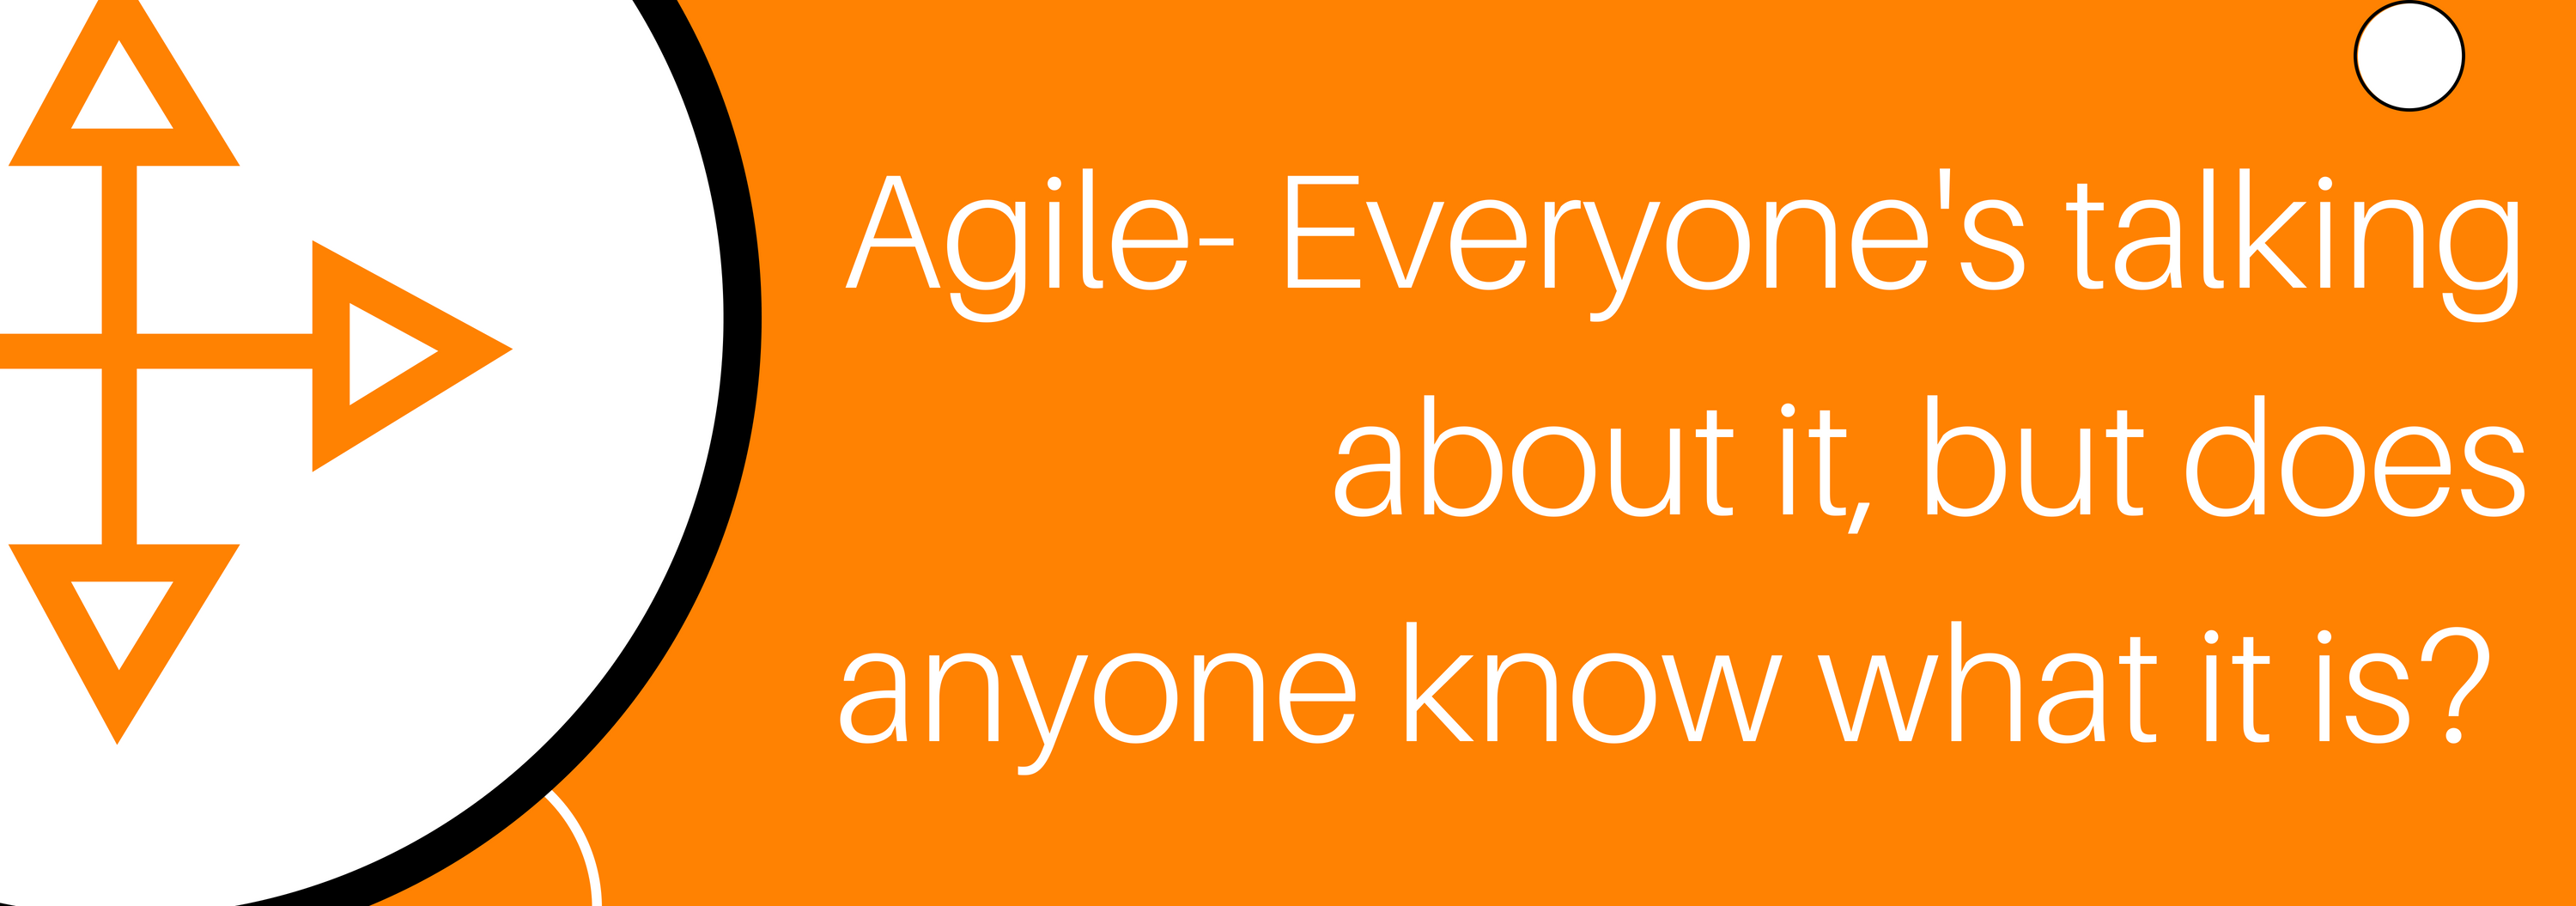 Agile- everyone's talking about it, but does anyone know what it is? 